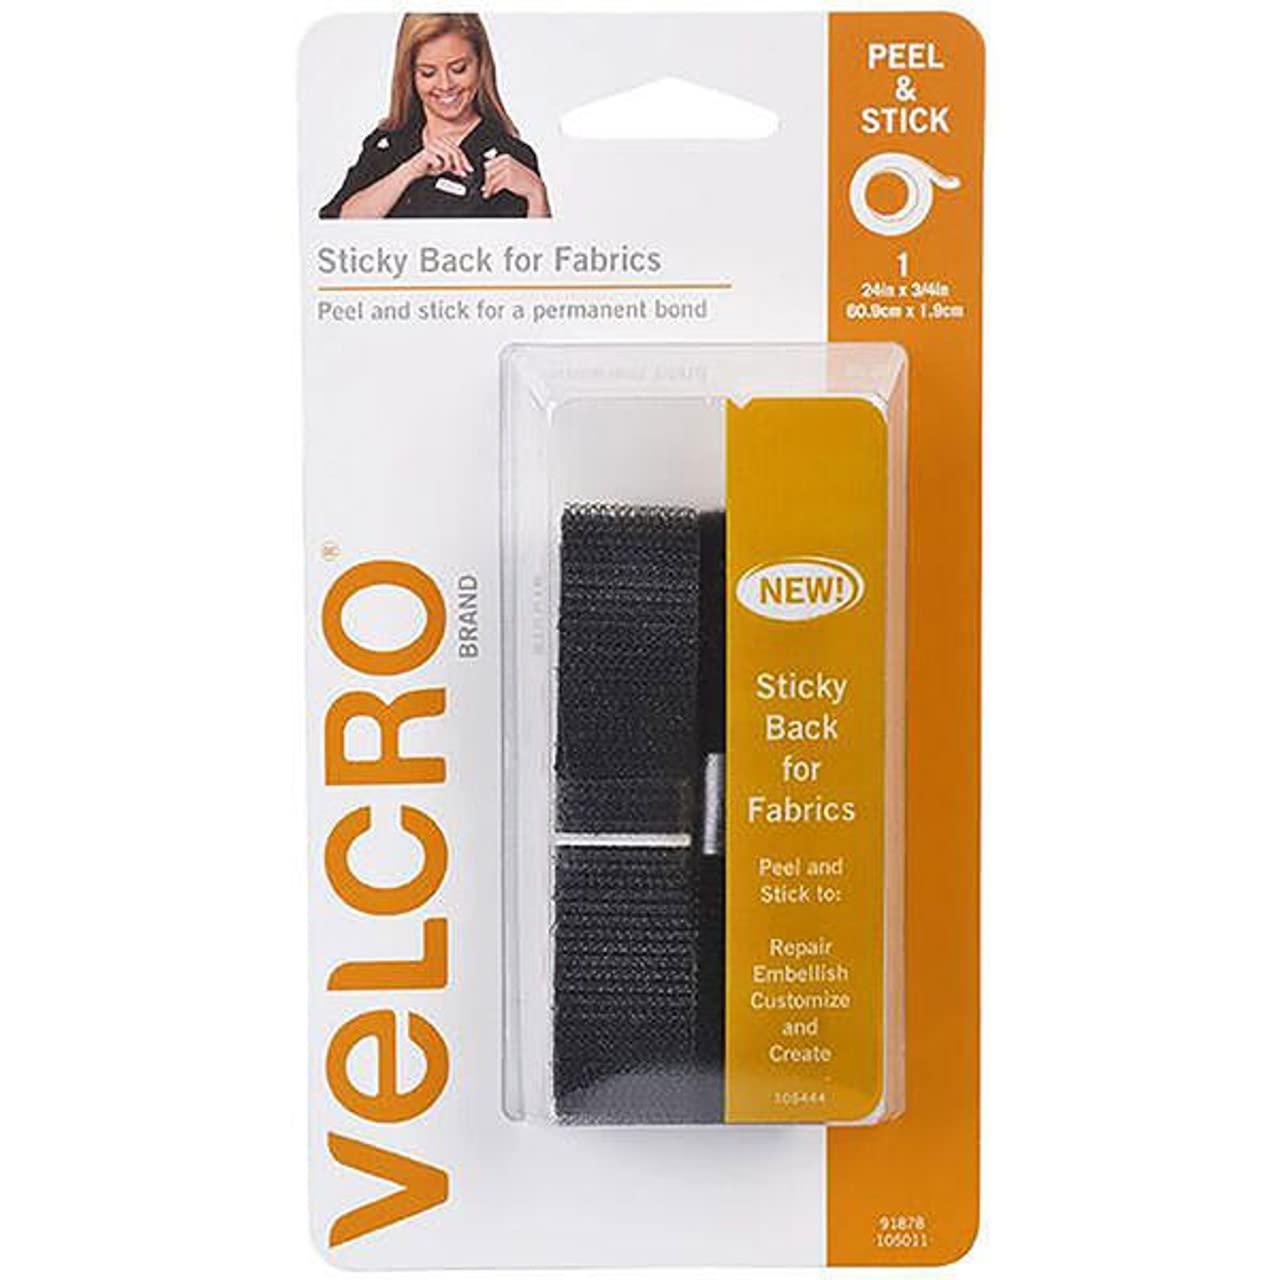 Sew On Hook & Loop Sewing/Stitch-On Fabric VELCRO® Brand Tape Black White